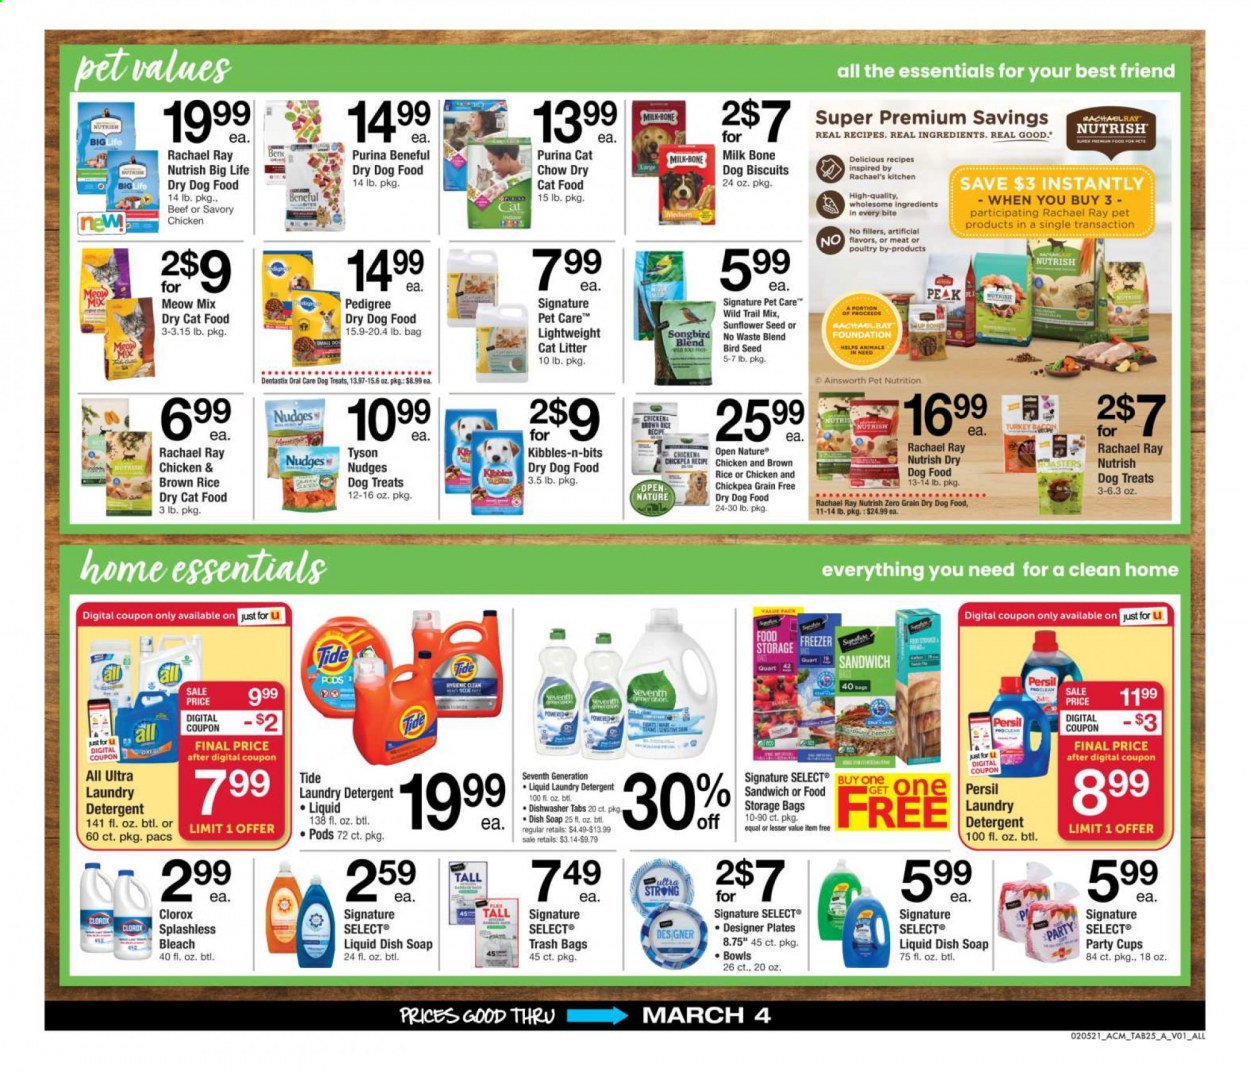 thumbnail - ACME Flyer - 02/05/2021 - 03/04/2021 - Sales products - sandwich, milk, sunflower seeds, detergent, Clorox, Tide, Persil, bleach, laundry detergent, soap, trash bags, storage bag, plate, party cups, cup, cat litter, animal food, bird food, cat food, dog food, Purina, dog biscuits, Dentastix, Pedigree, dry dog food, dry cat food, Meow Mix, Nutrish, bag. Page 25.